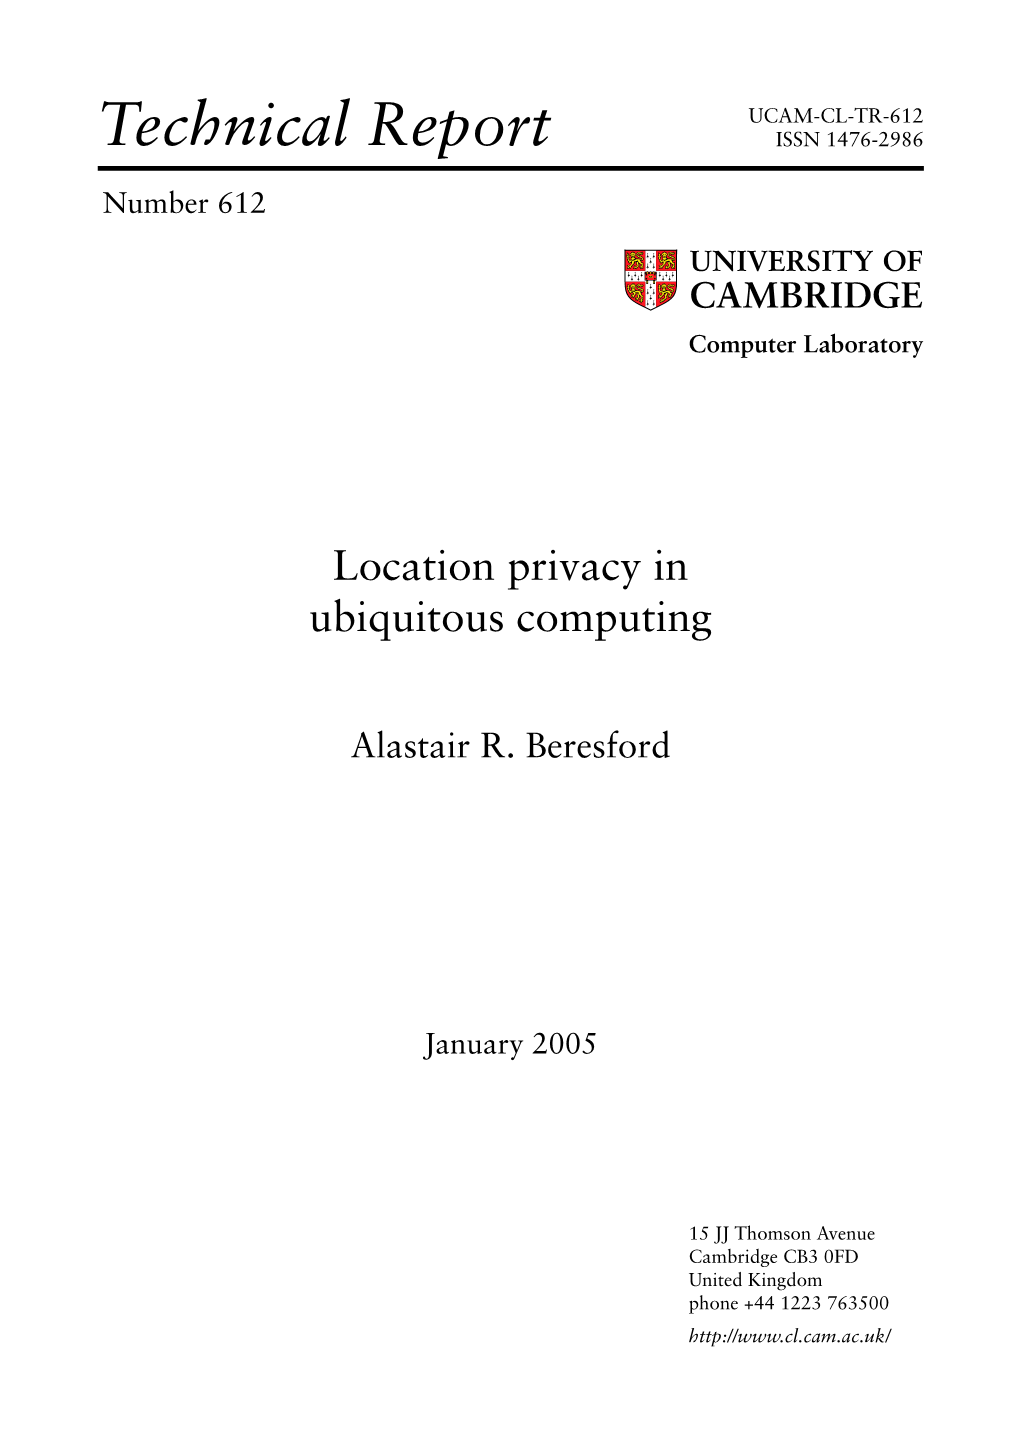 Location Privacy in Ubiquitous Computing